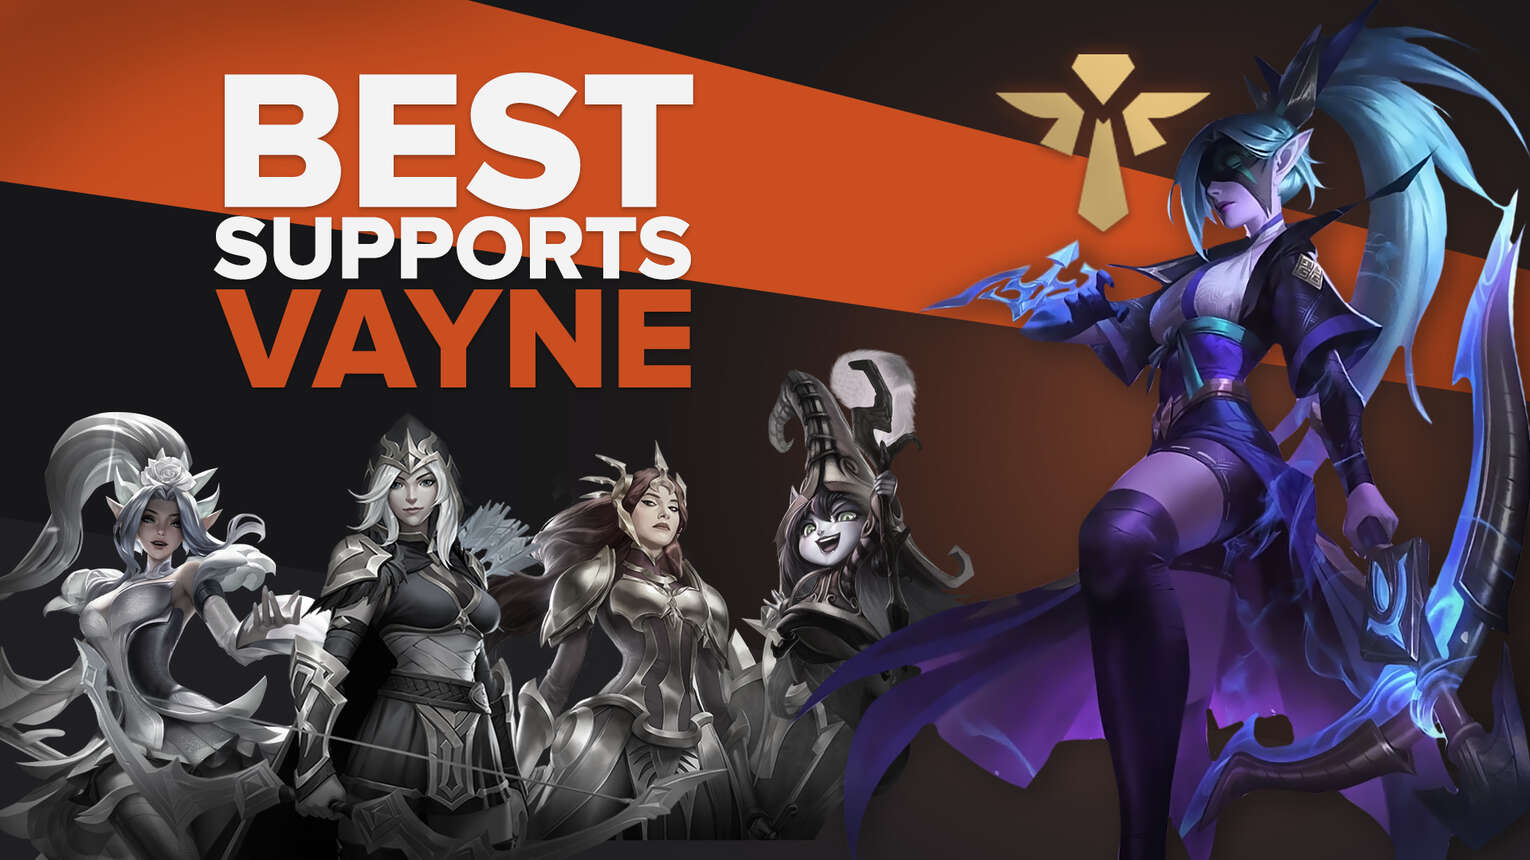 The best support champions for Vayne in League of Legends